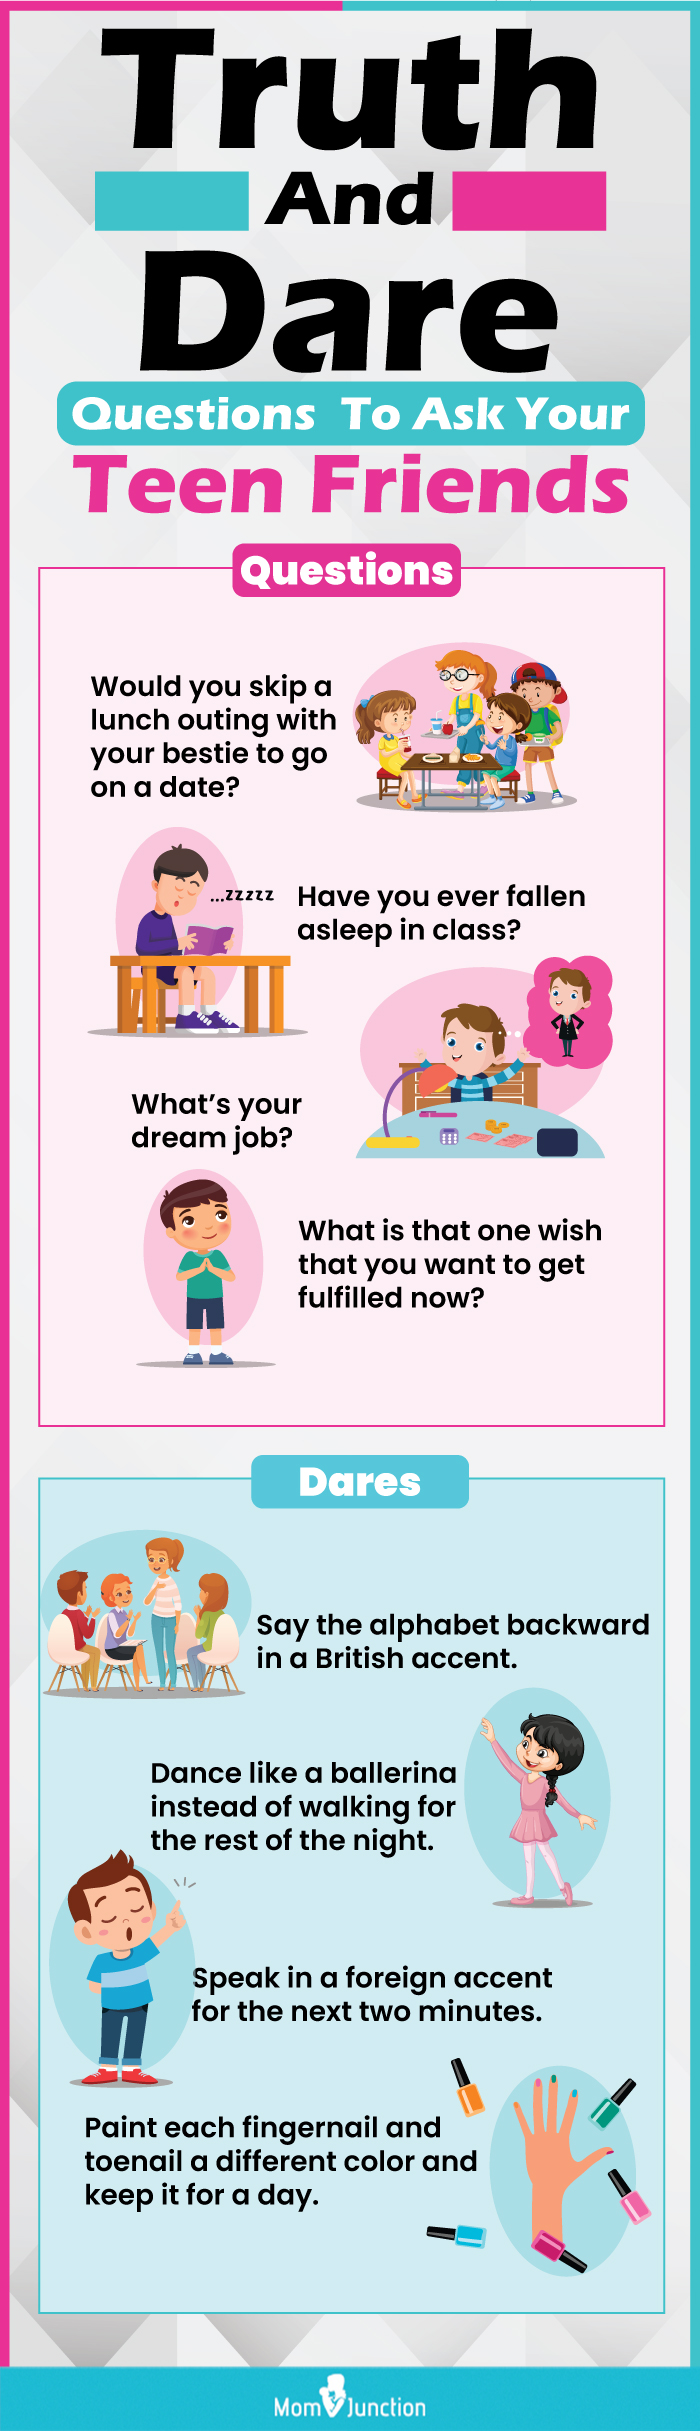 truth and dare questions to ask your teen friends (infographic)